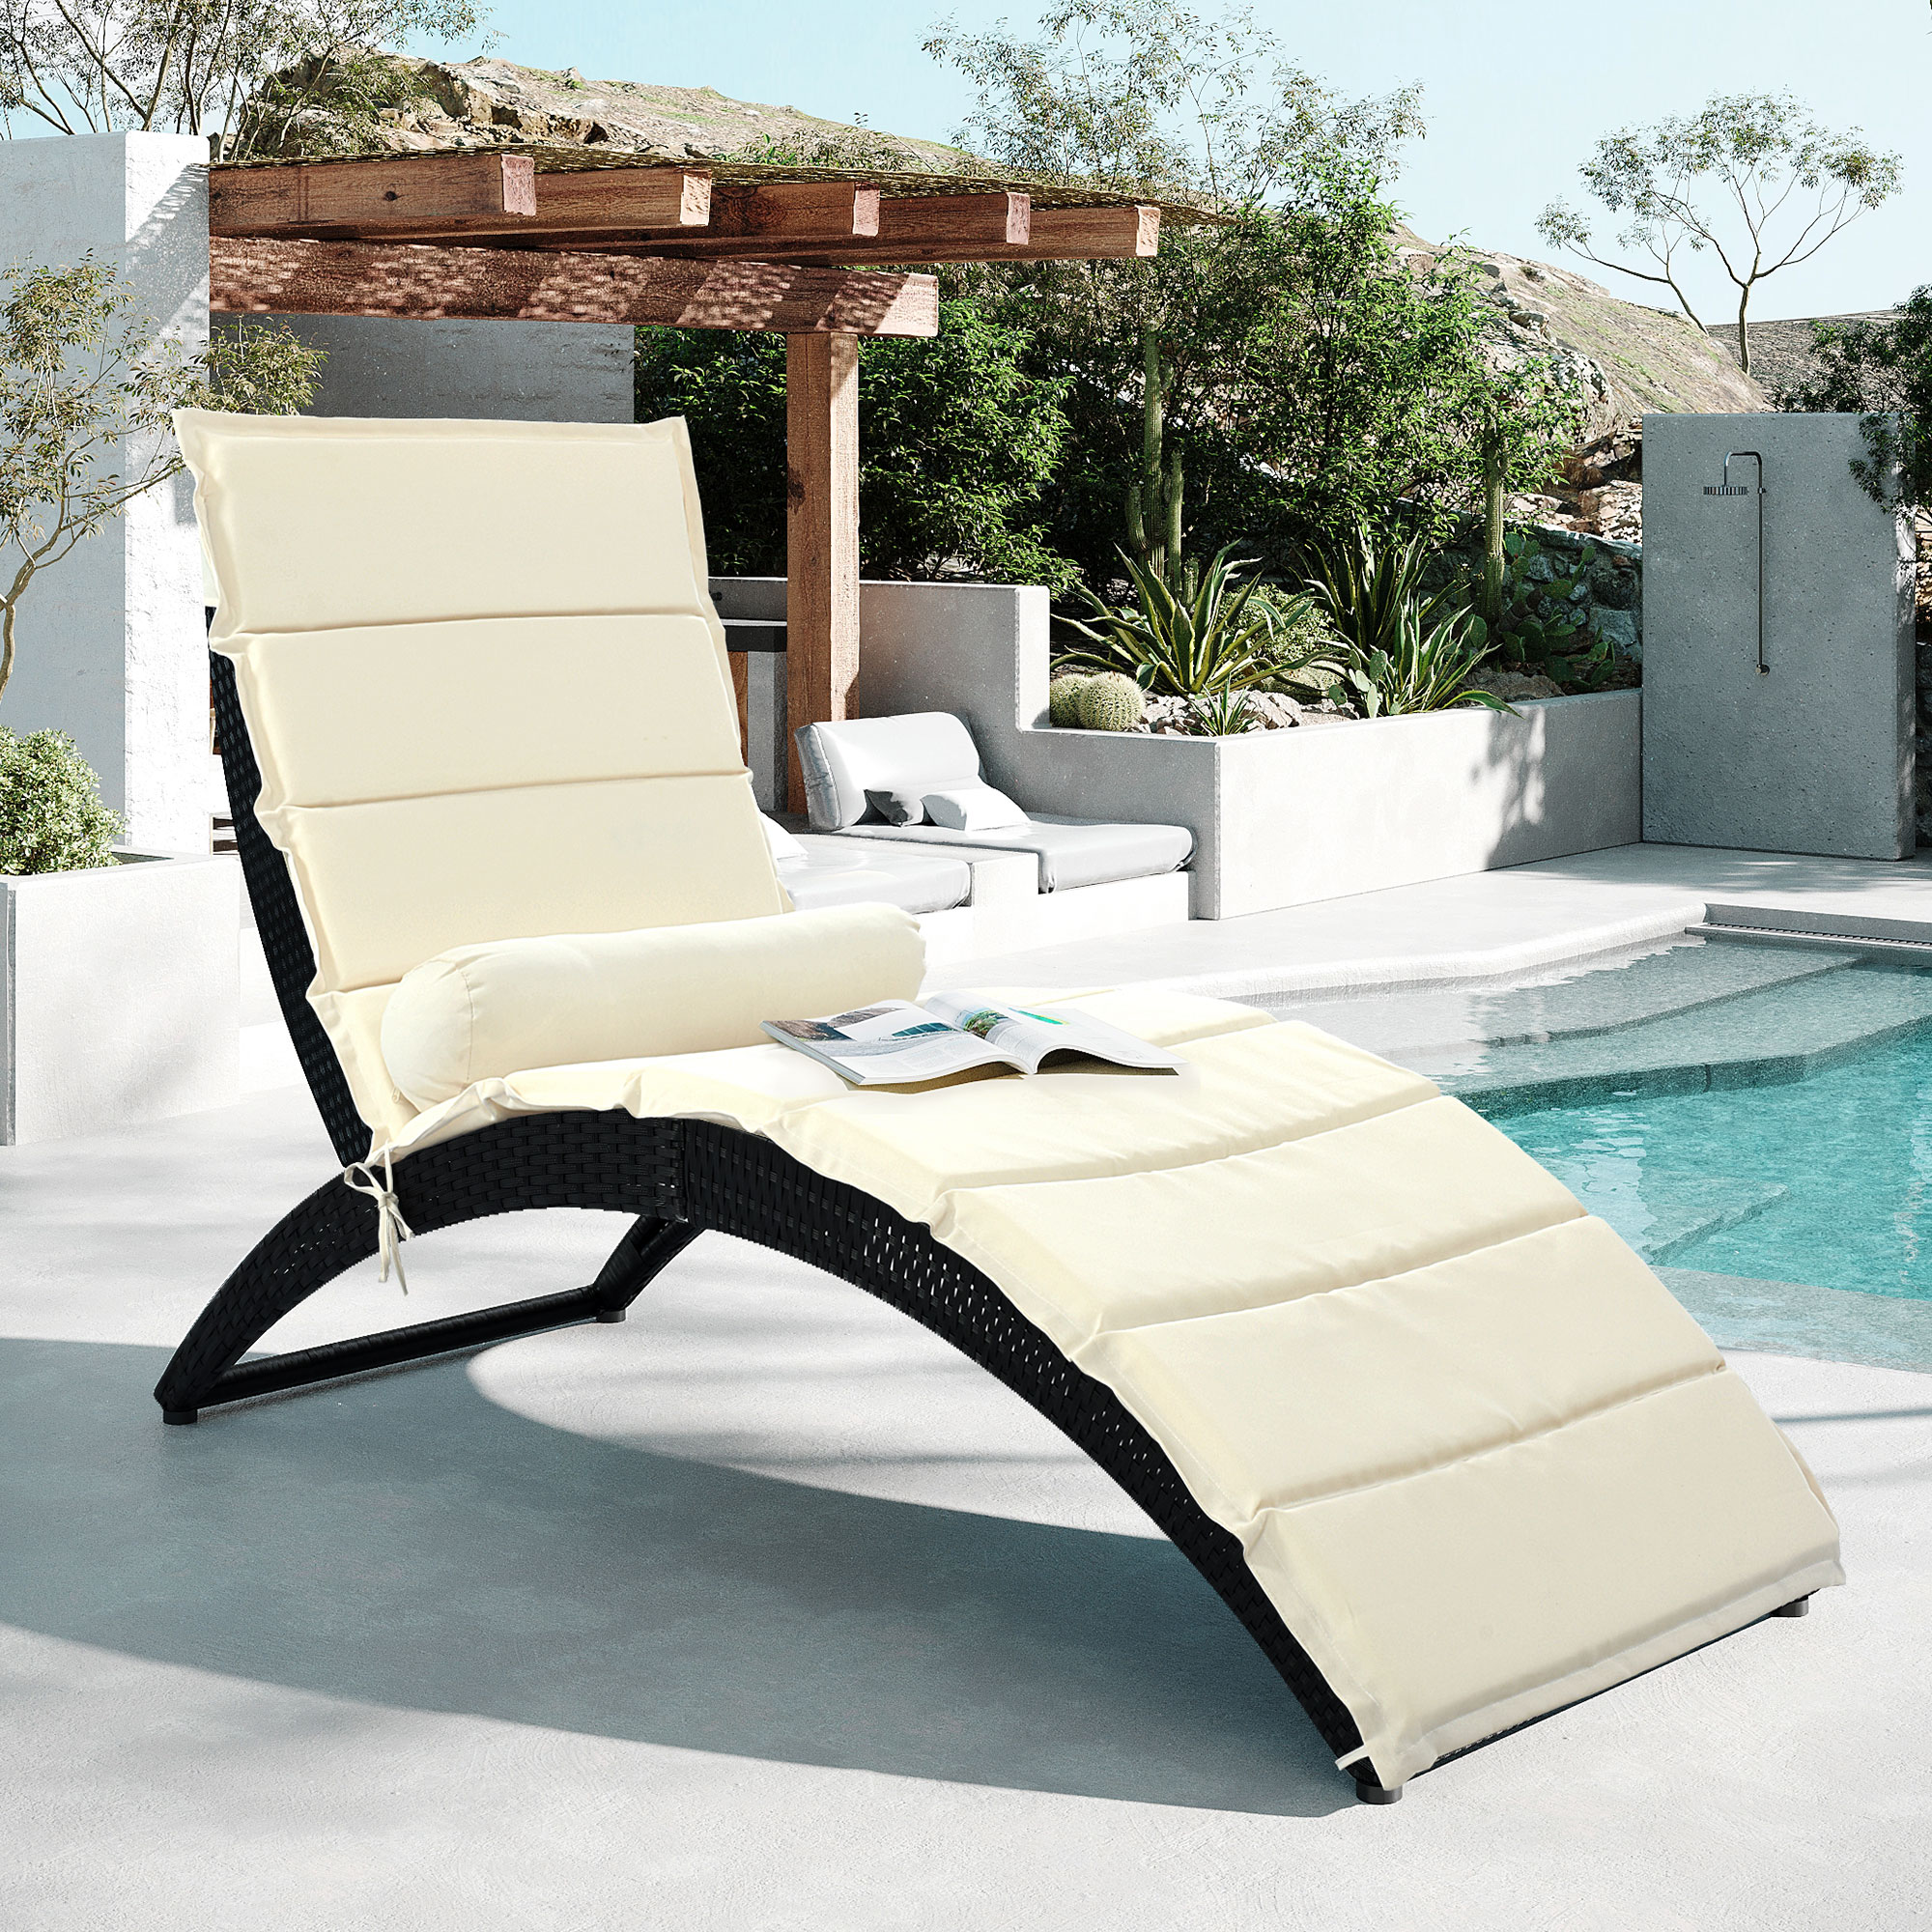 Sesslife Chaise Lounge Chairs for Outside, Patio Adjustable Lounge Chairs with Table Outdoor Rattan Wicker Pool Chaise Lounge Chairs Cushioned Poolside Folding Chaise Lounge Set - image 1 of 10